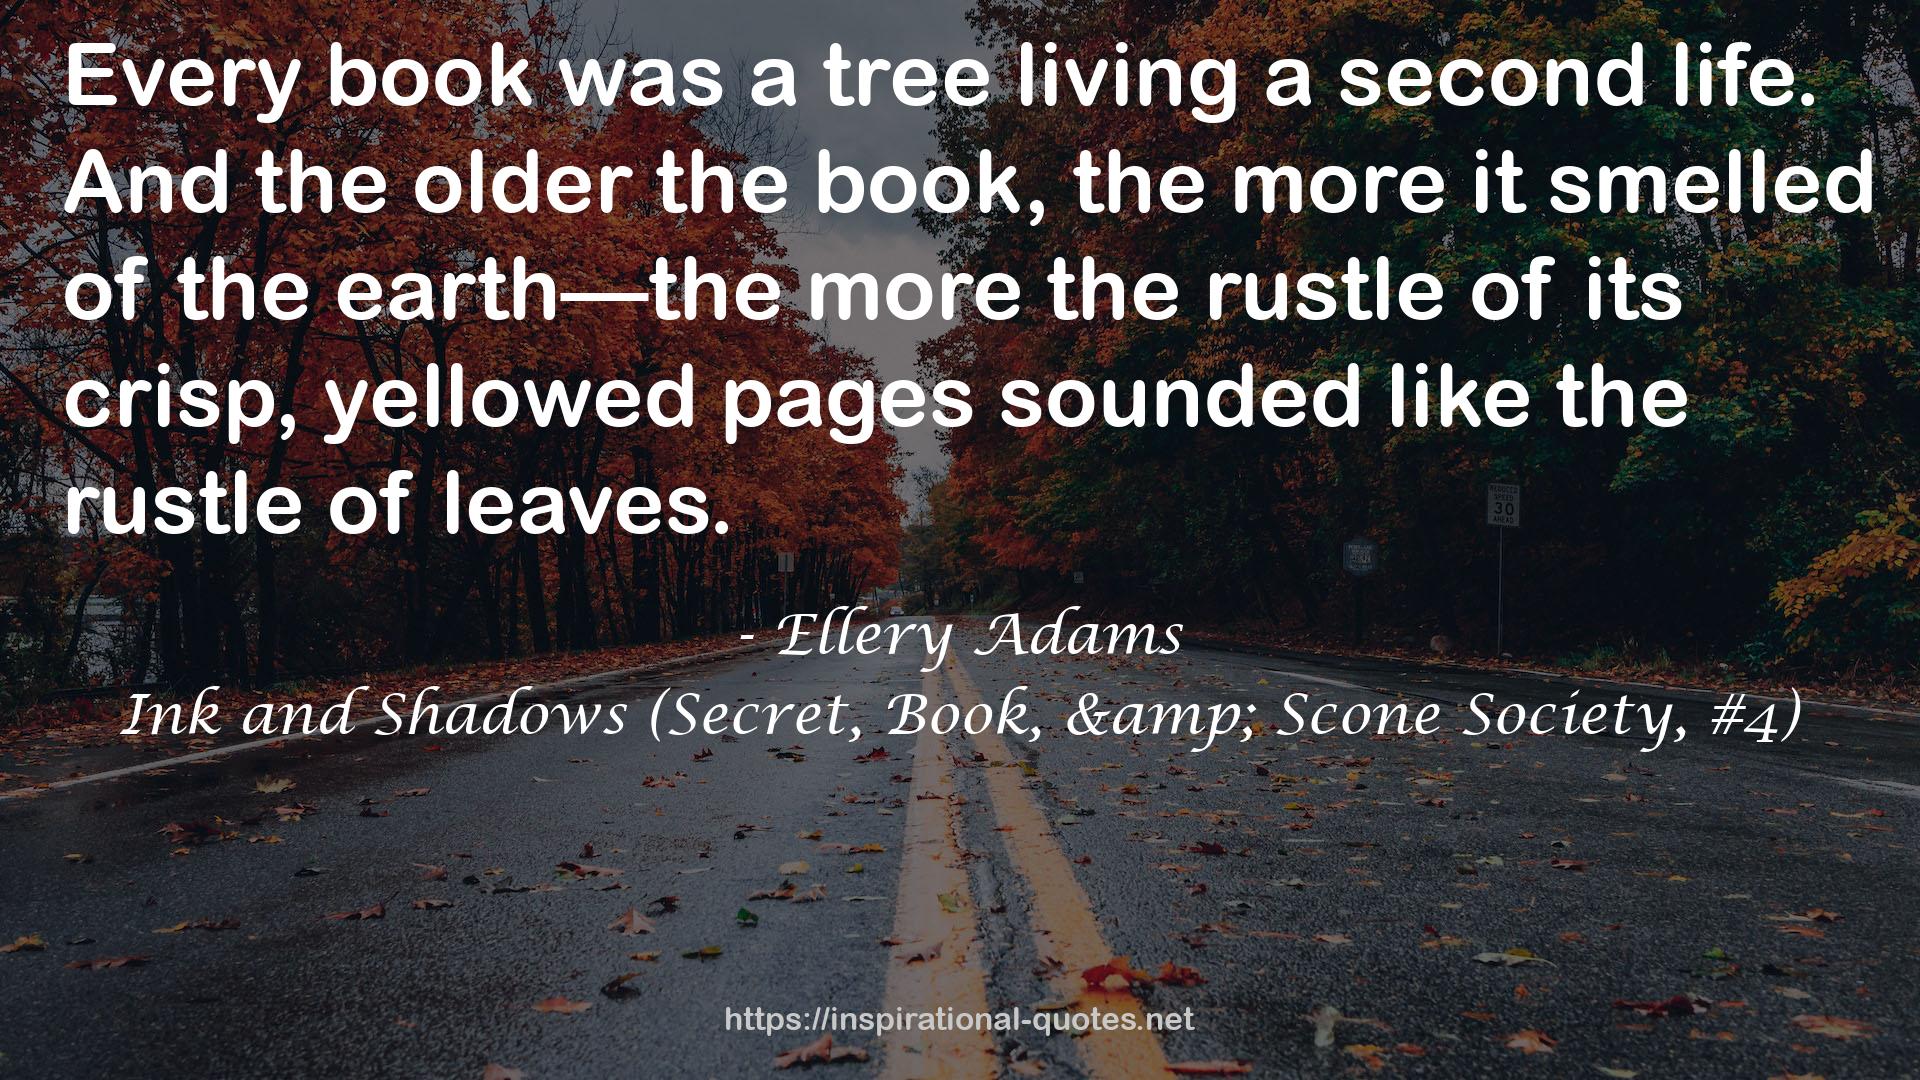 Ink and Shadows (Secret, Book, & Scone Society, #4) QUOTES